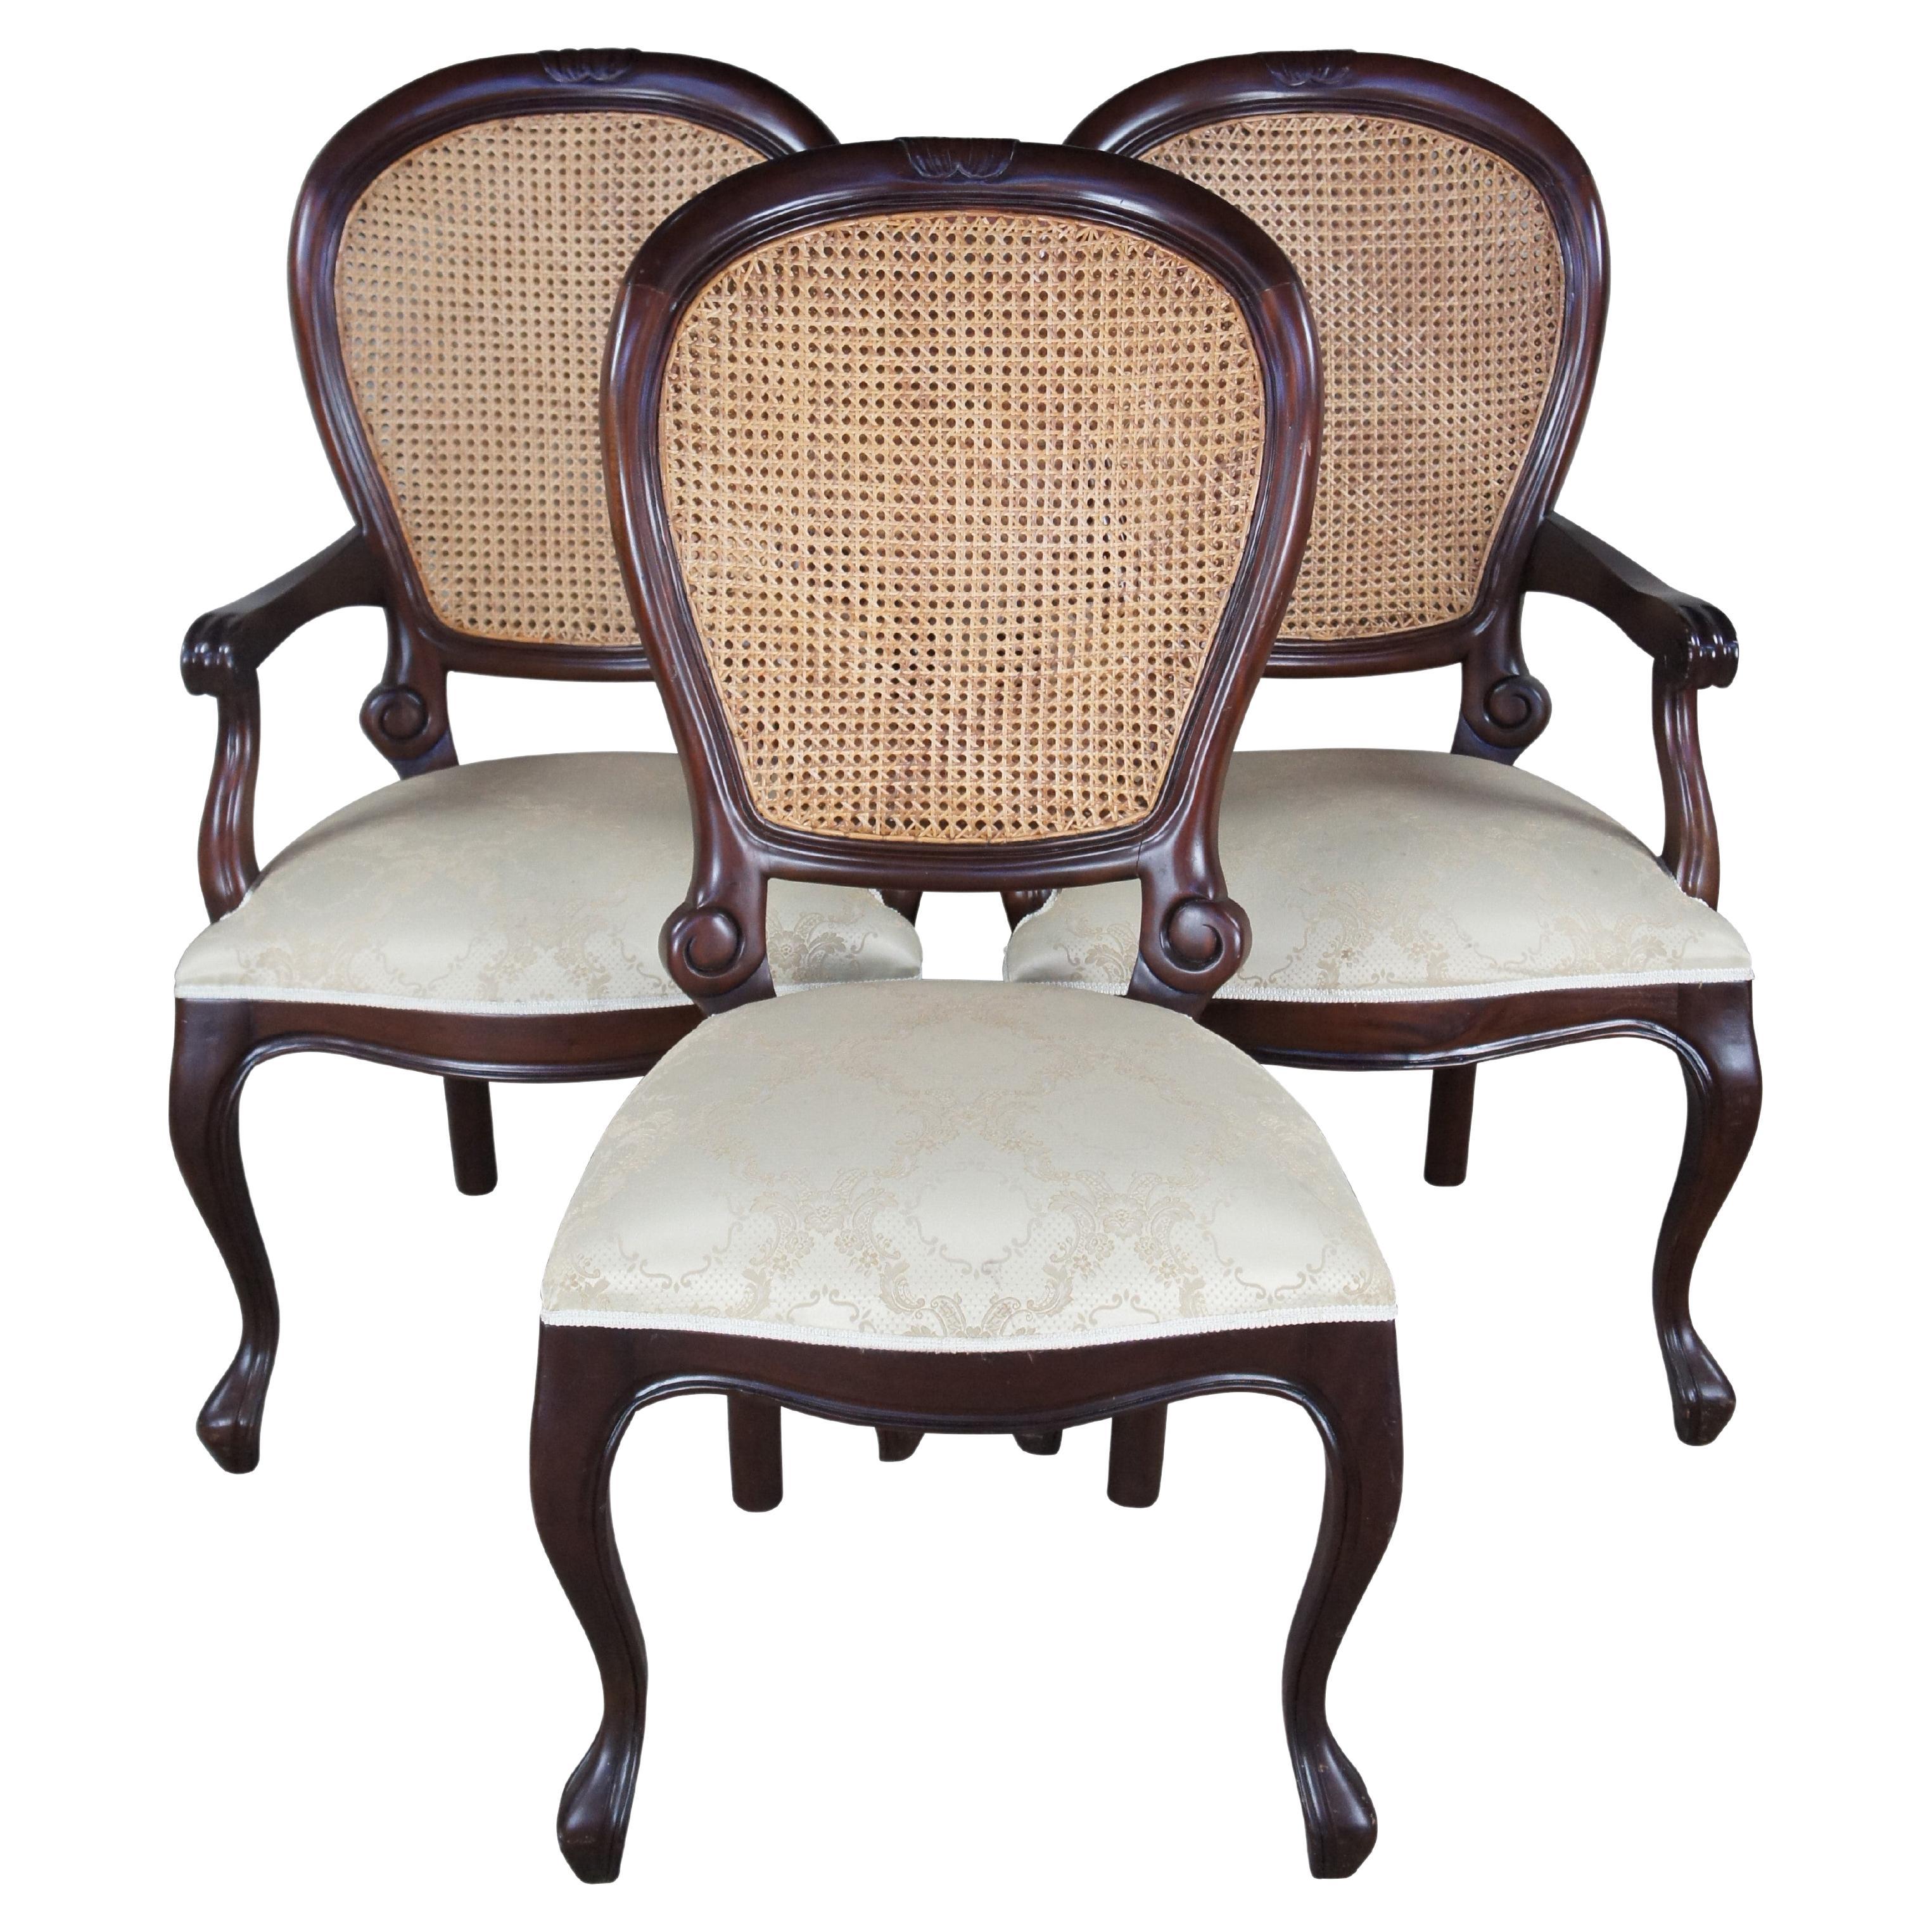 3 Victorian Revival Mahogany Balloon Back Caned Dining Chairs Silk Brocade Seats For Sale